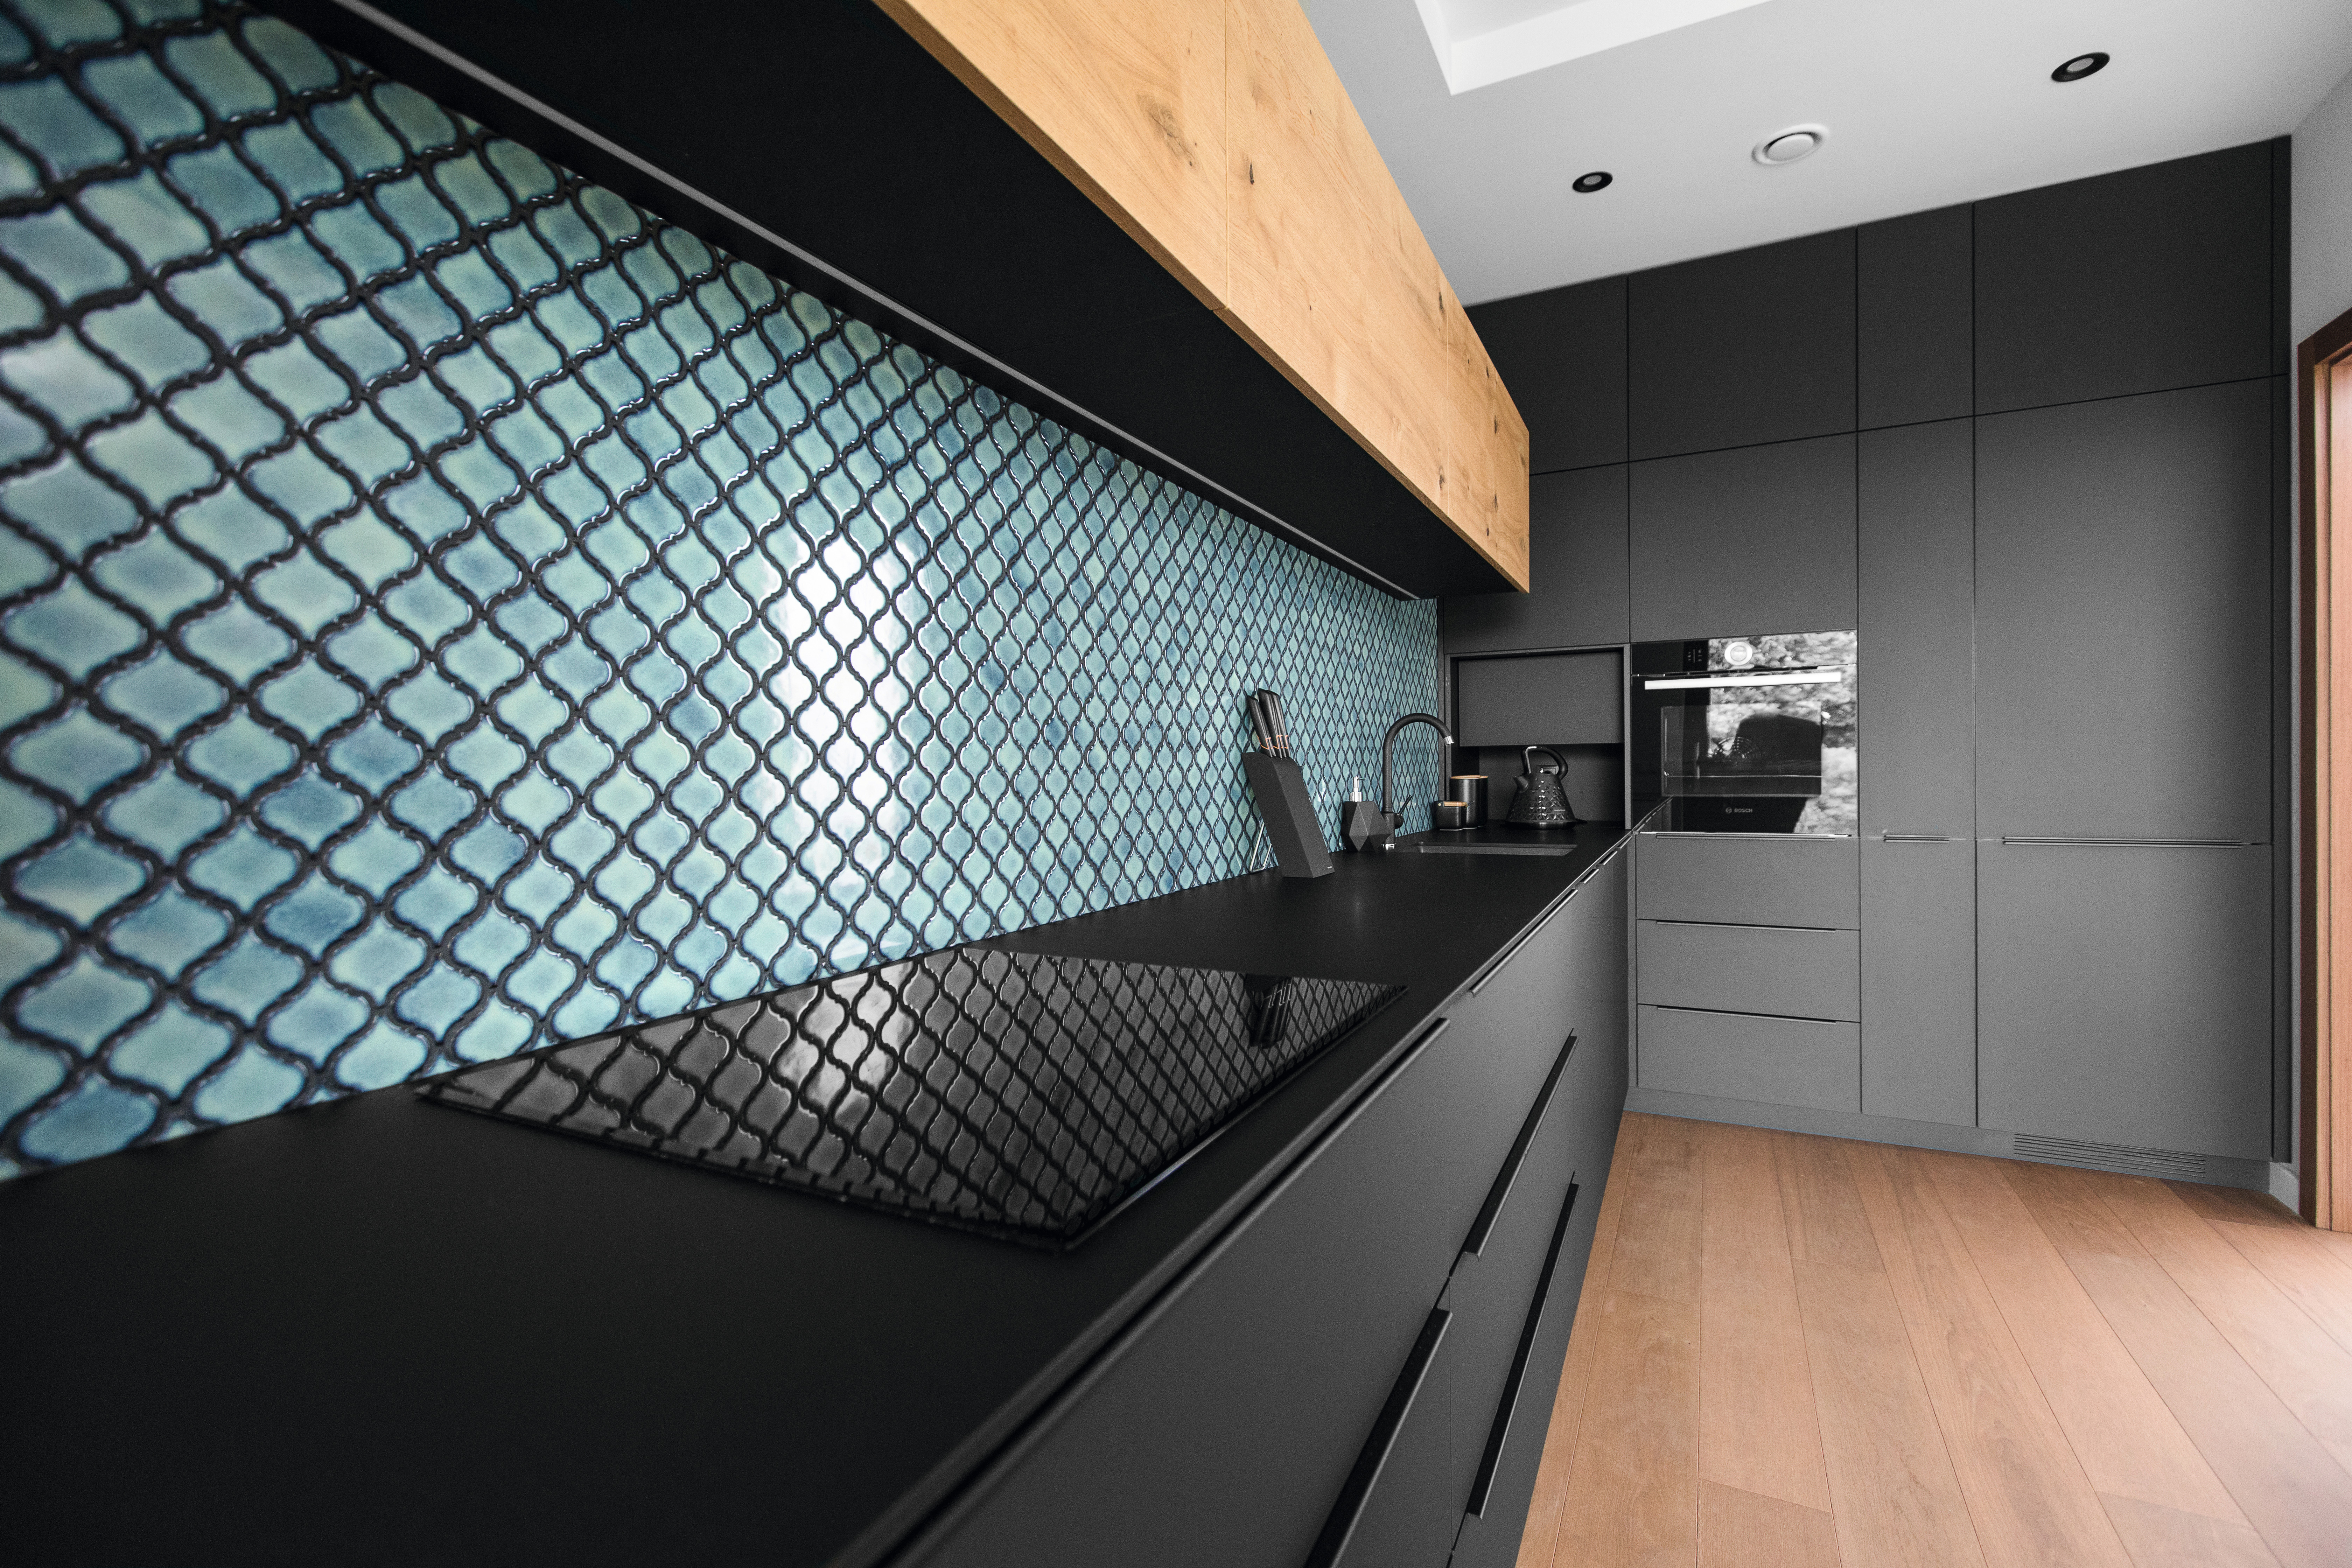 The colour black elegantly takes a back seat and provides an ideal stage for the mosaic design.